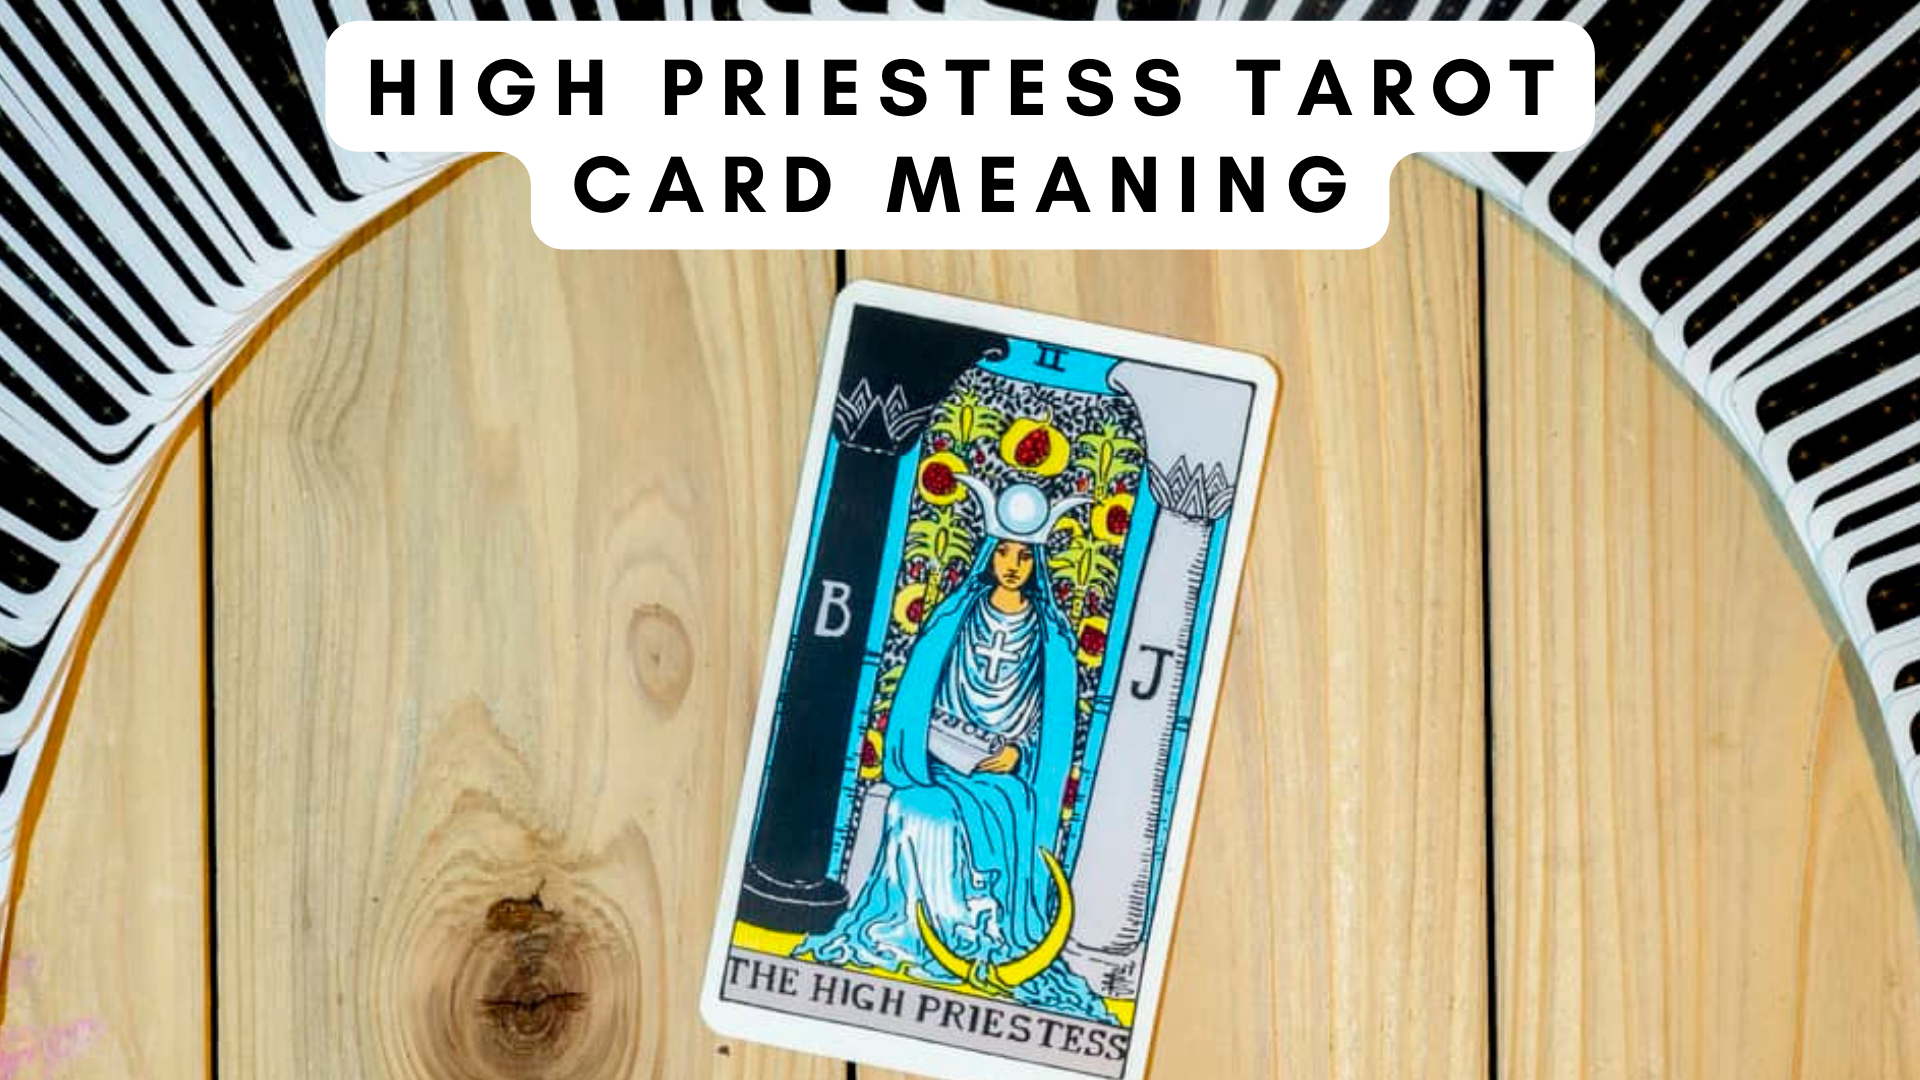 High Priestess Tarot Card Meaning - A Symbol Of Overall Greater Power